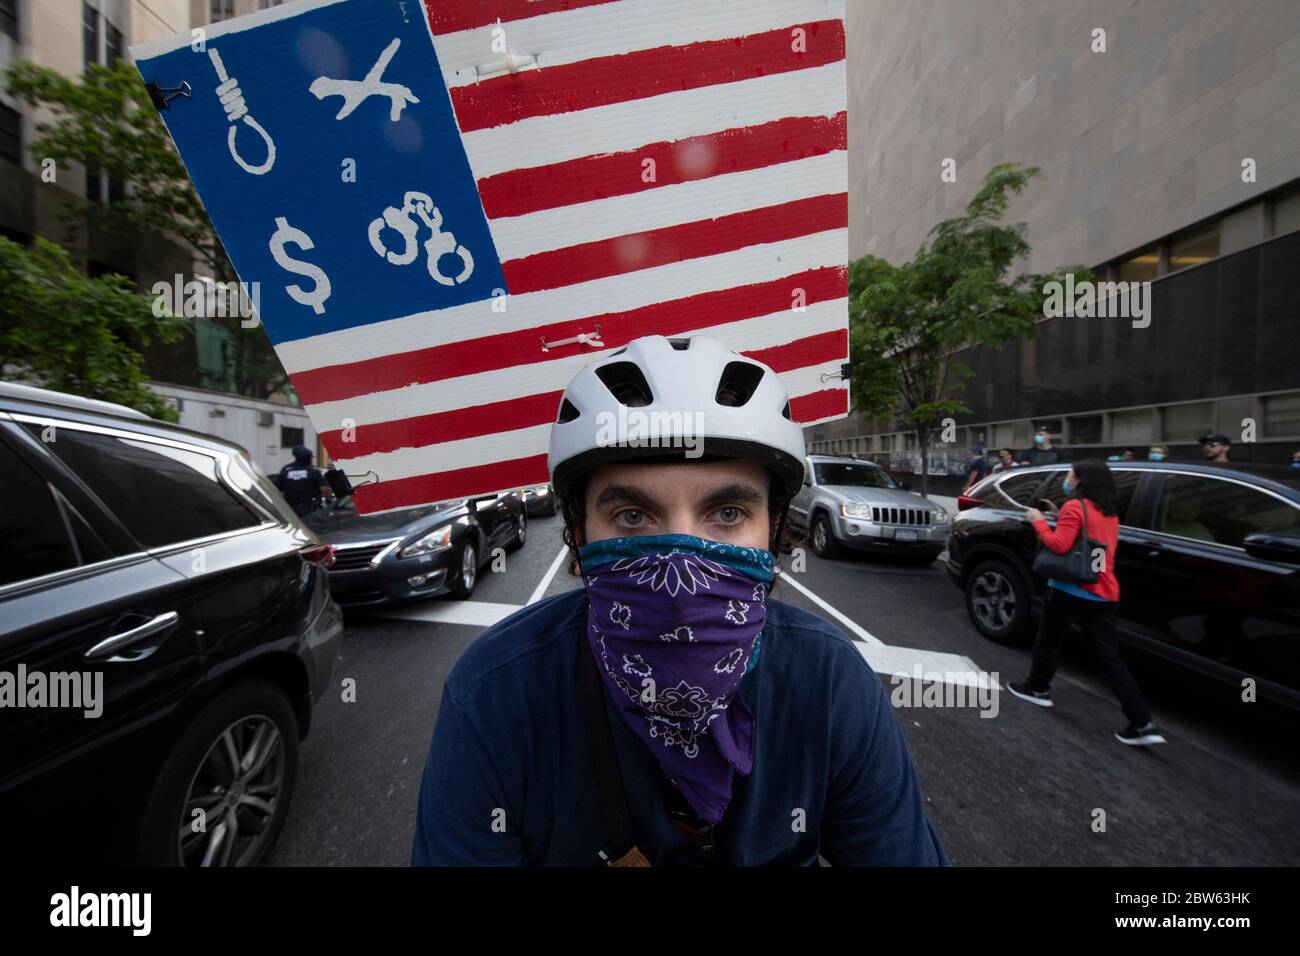 New York, New York, USA. 29th May, 2020. JAMES MCFADDEN of Brooklyn, New York, participates in the protest killing of GEORGE FLOYD during a rally near Manhattan Criminal Court in New York, New York. MCFADDEN's post represents 'what the United States Stands for, being about money inequality, racism.'' .For the second day protesters took to the street rallying against recent police misconduct, racial killings and altercations against African Americans'' including the latest death of George Floyd by Minneapolis, Minnesota Police officer Derek Chauvin. Several arrests were made at the protes Stock Photo